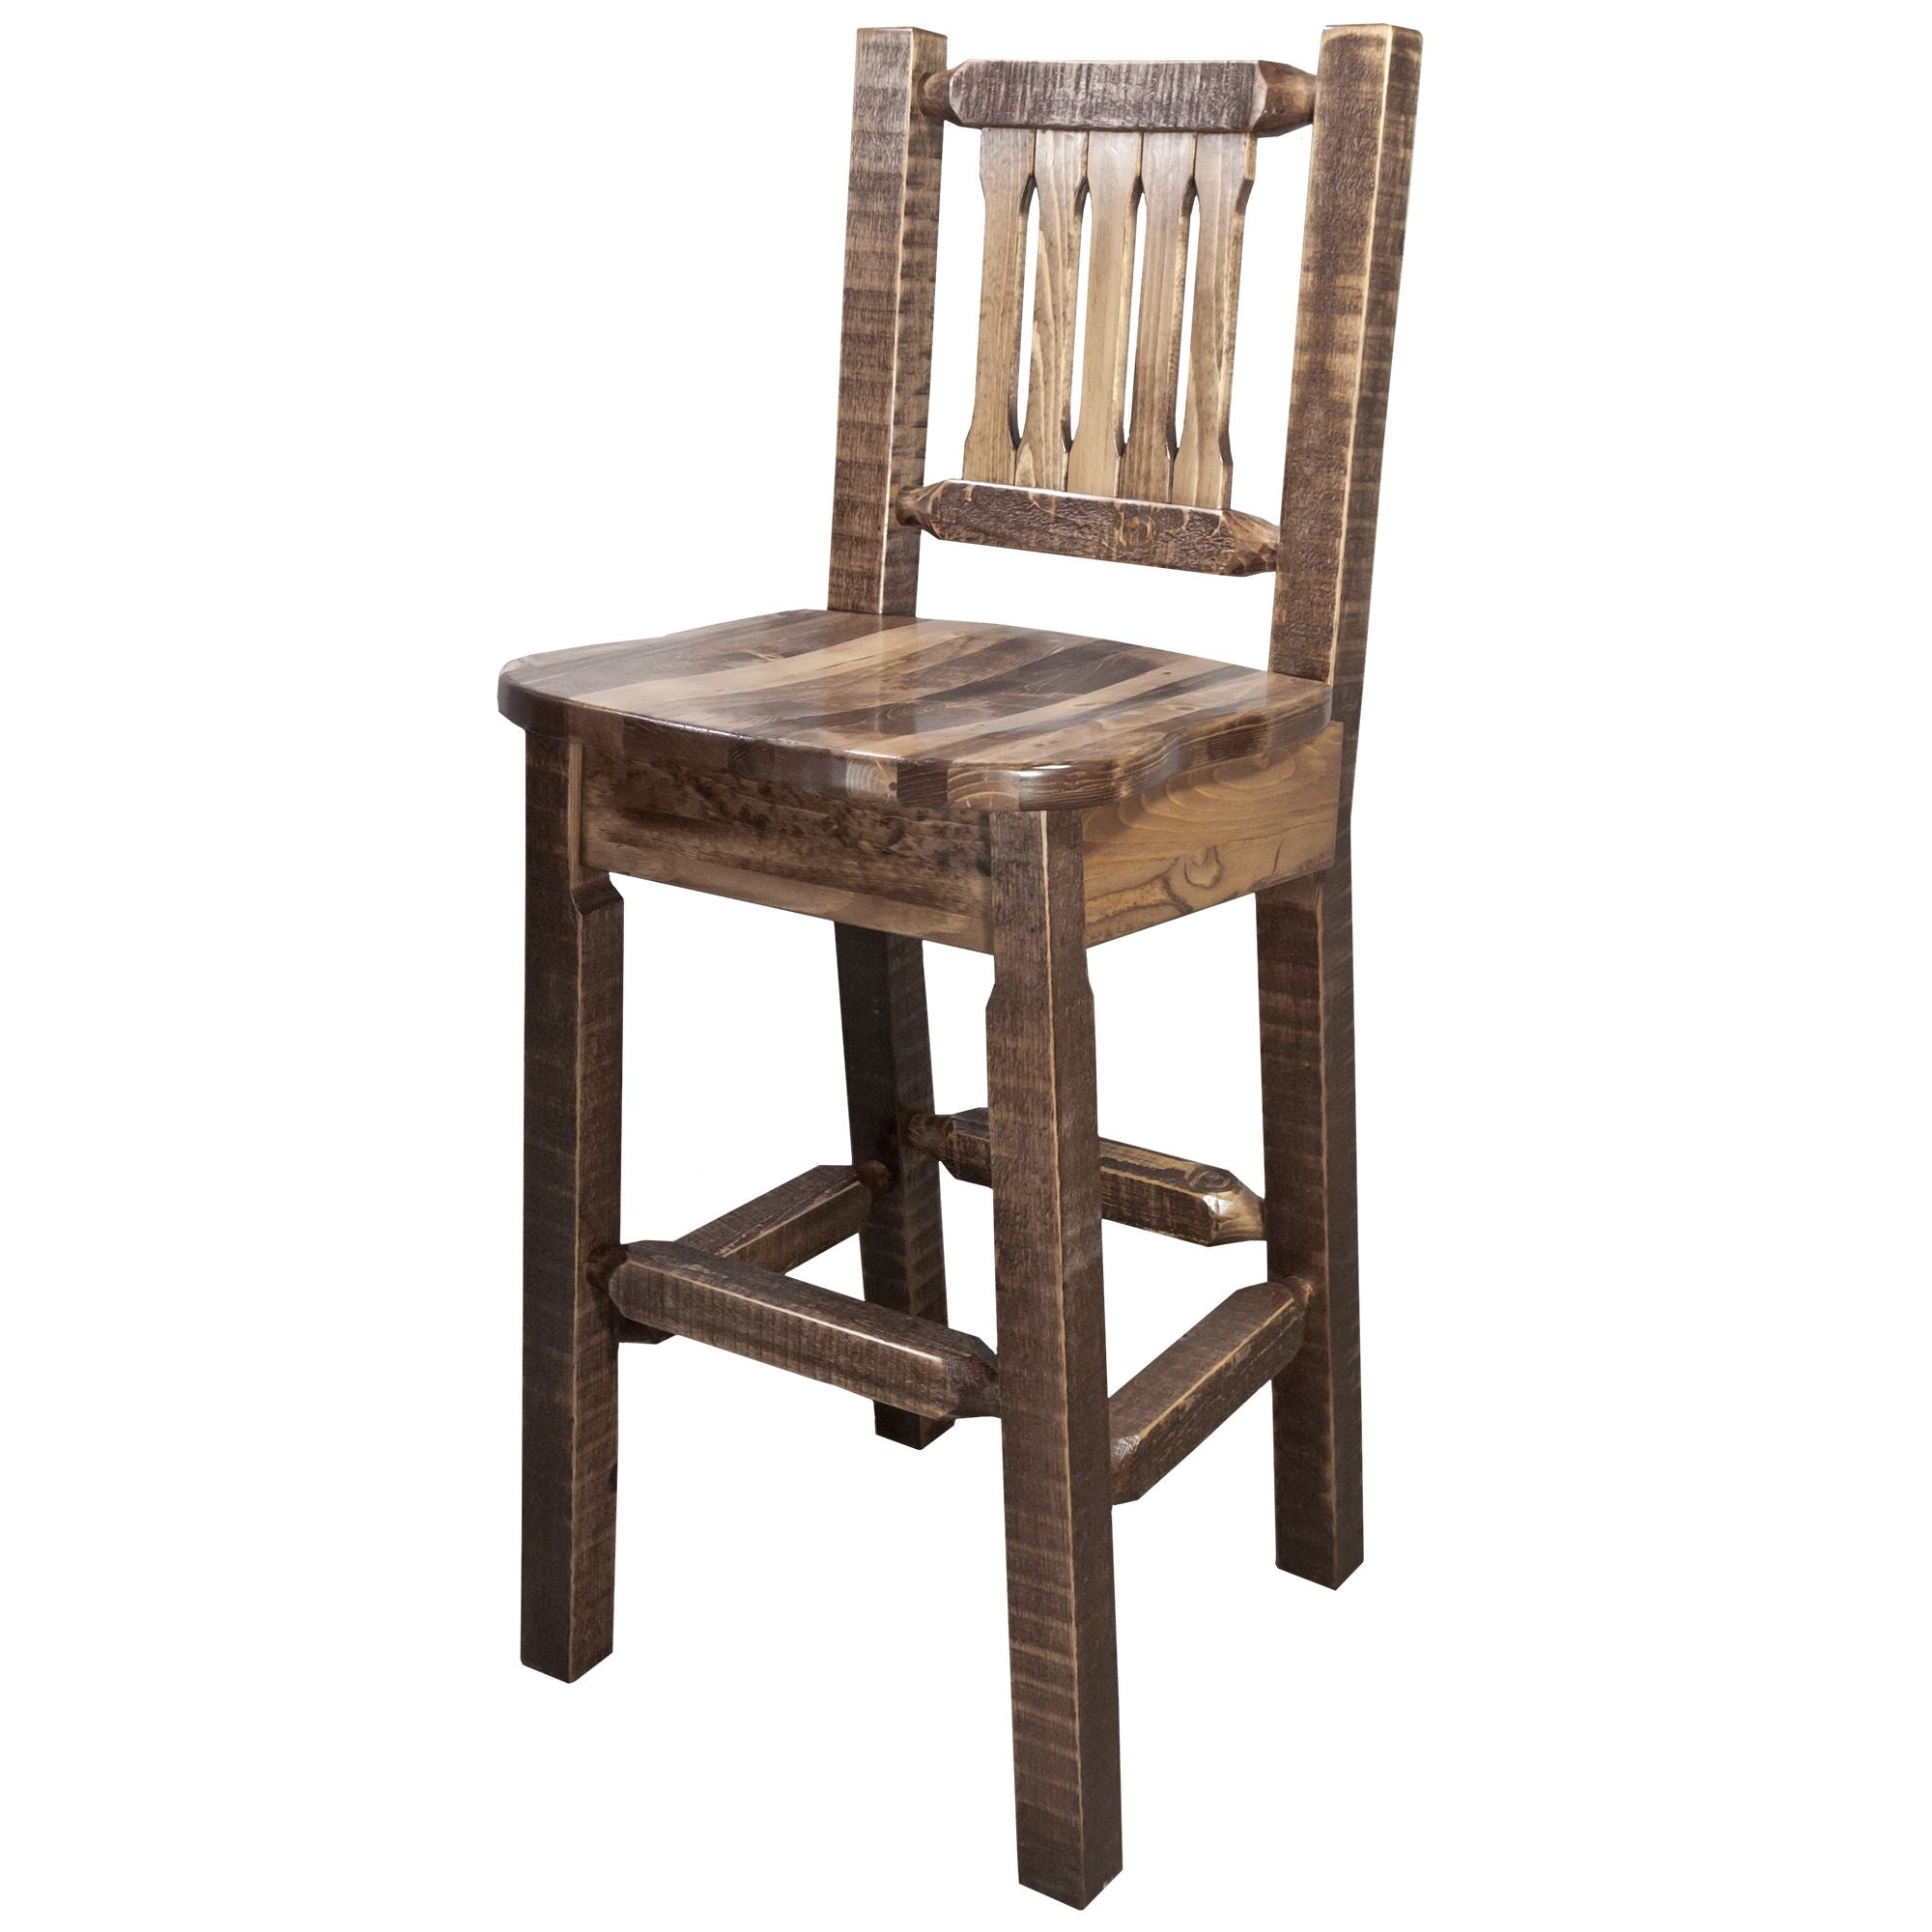 Montana Homestead Collection Upholstery Barstool With Back - Stain & Clear Lacquer Finish